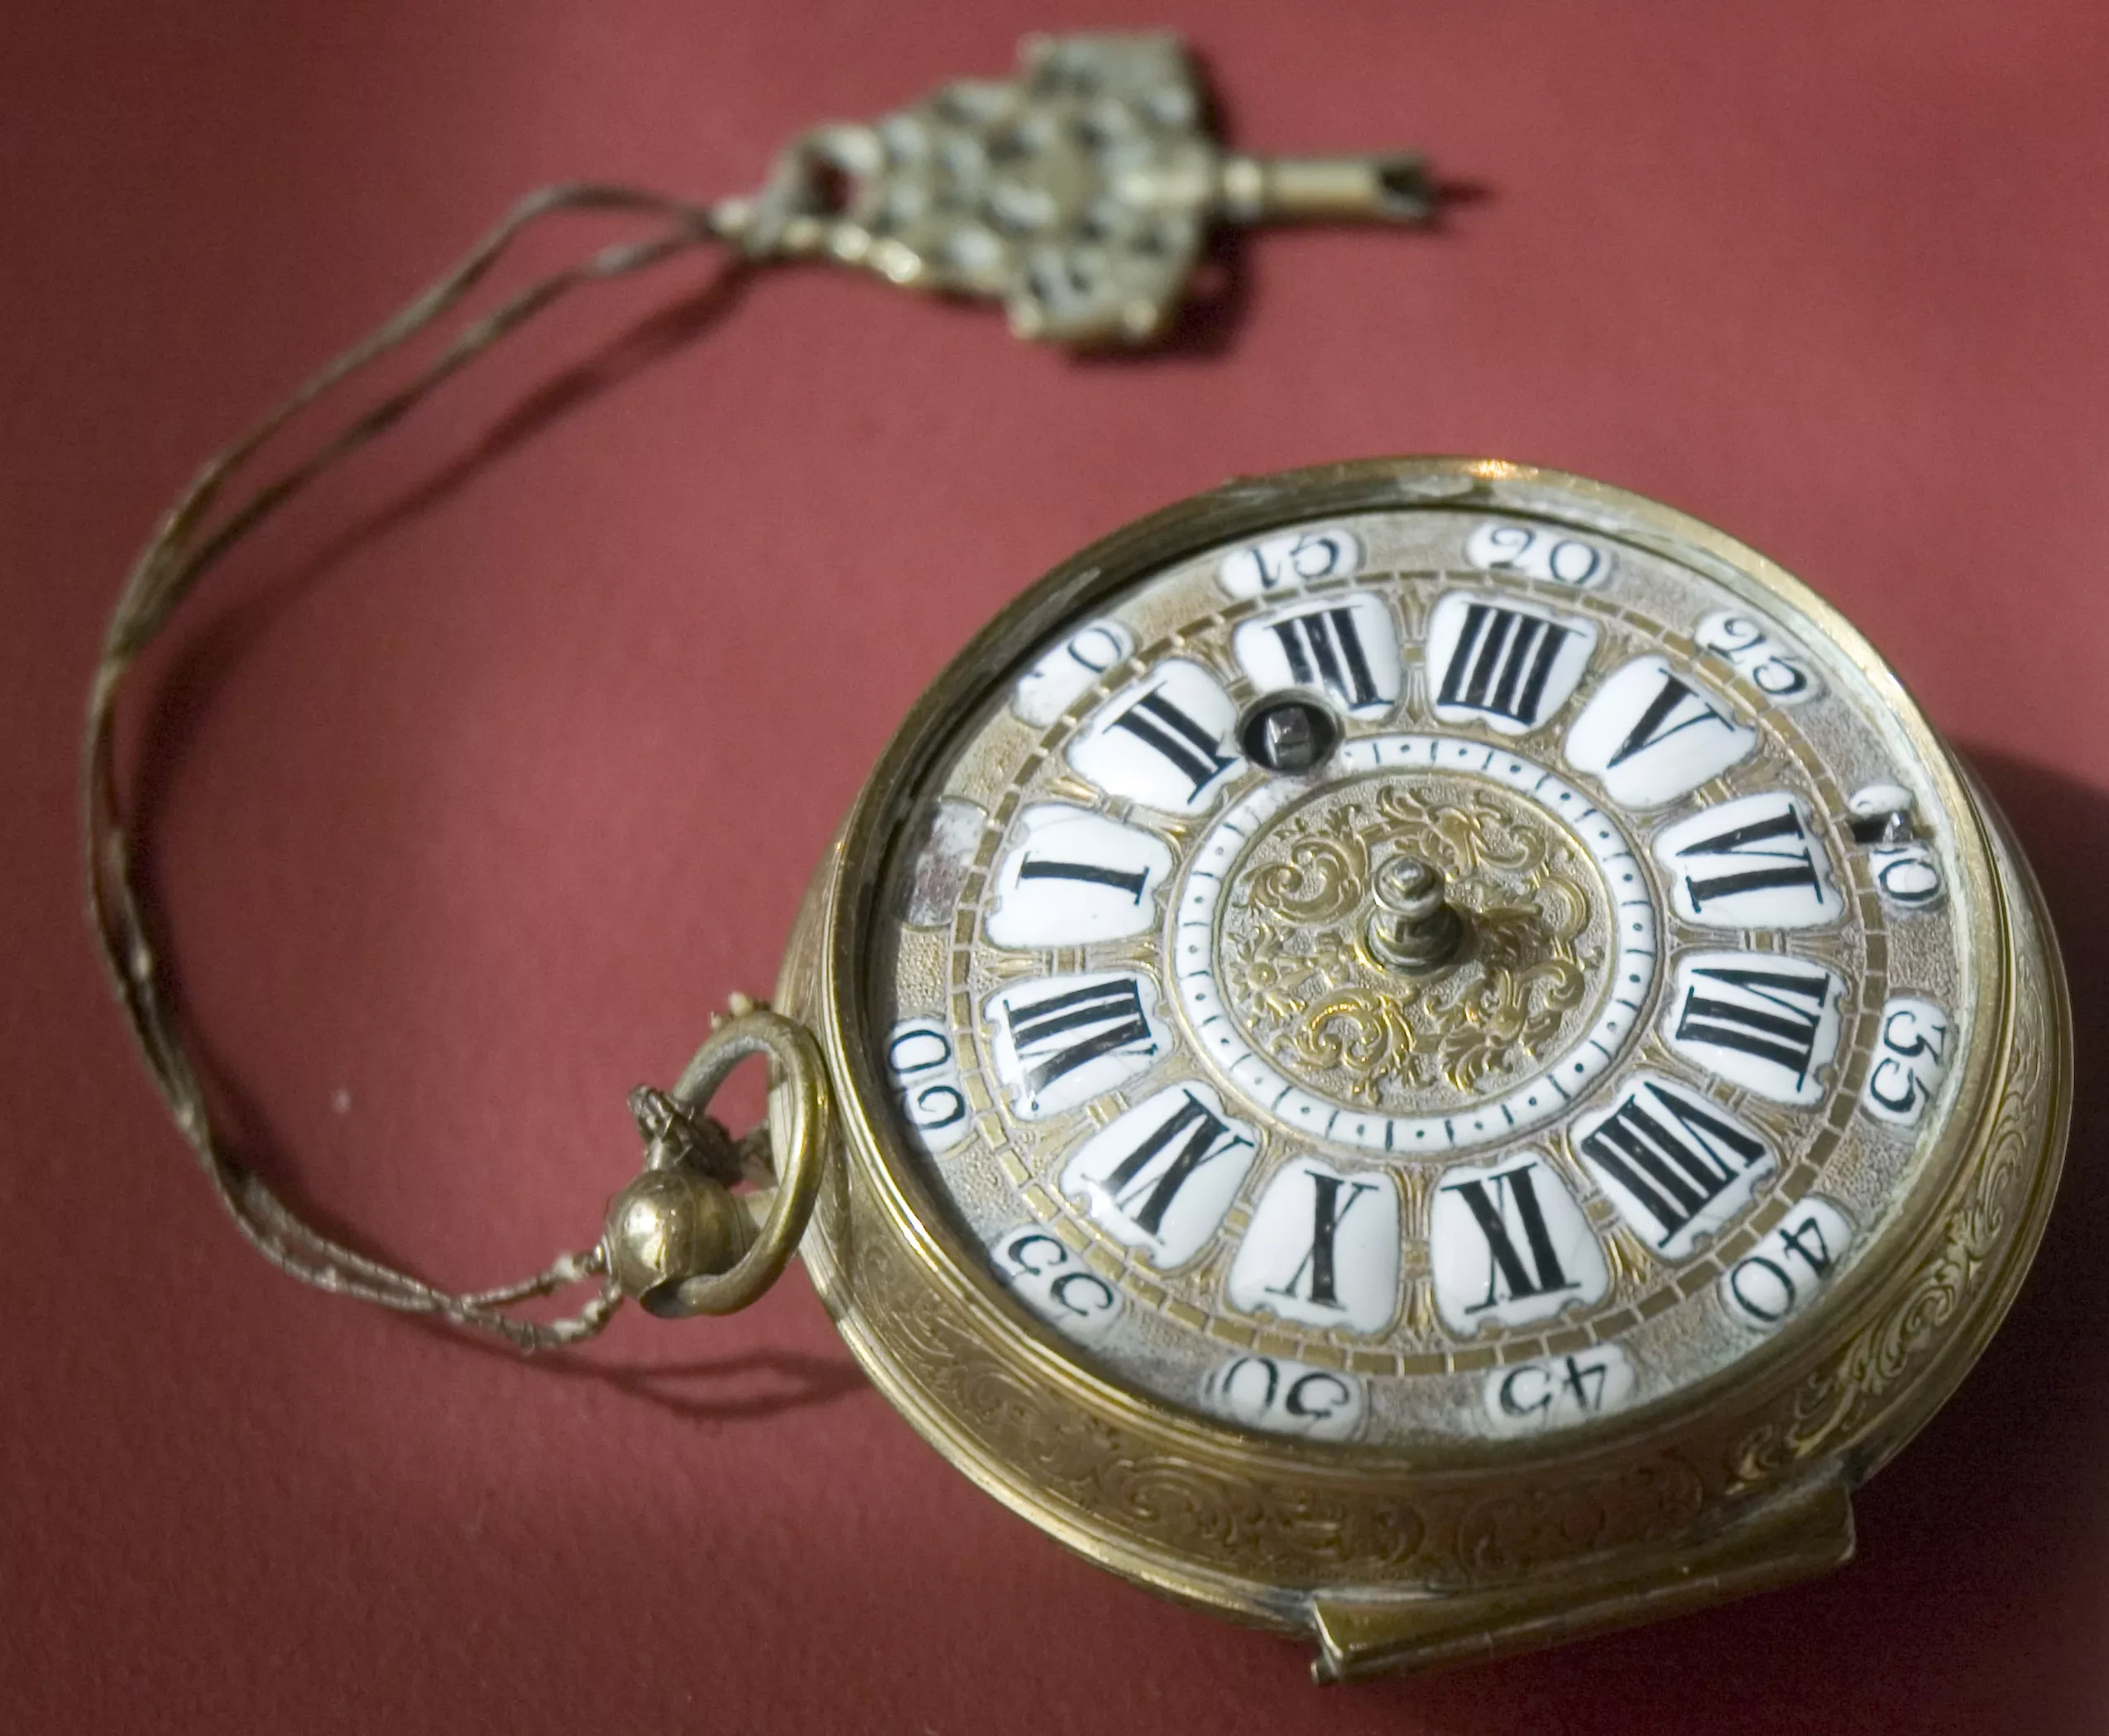 100 Years ago, people kept their timepieces in their pockets